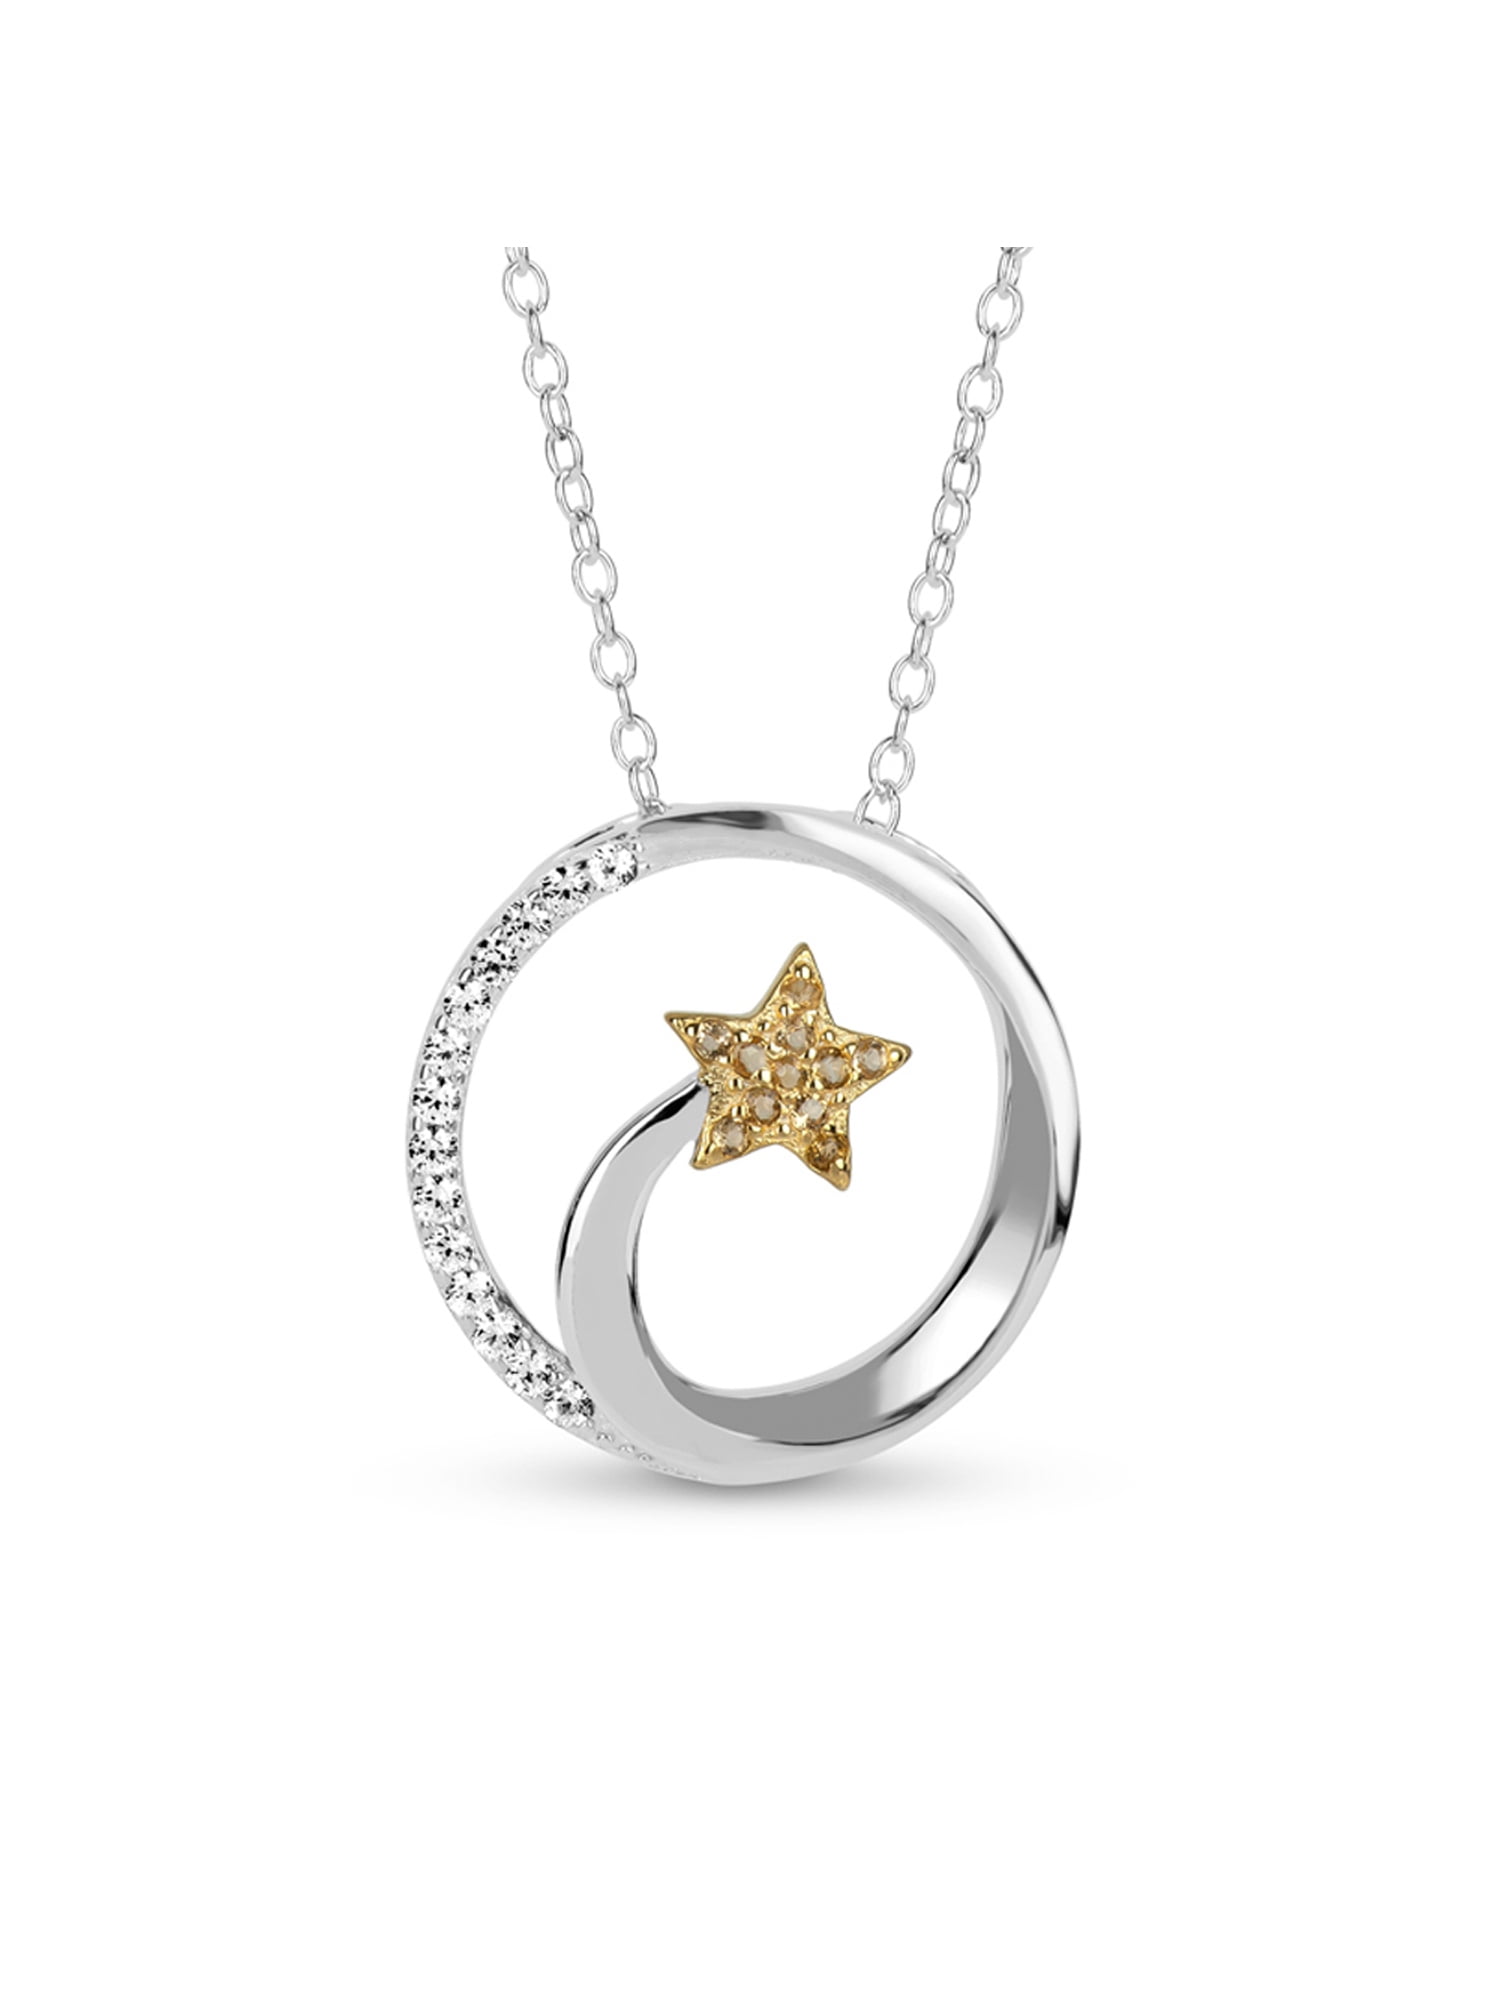 Jewels Obsession Silver Shooting Star Pendant 14K Yellow Gold-plated 925 Silver Shooting Star Pendant